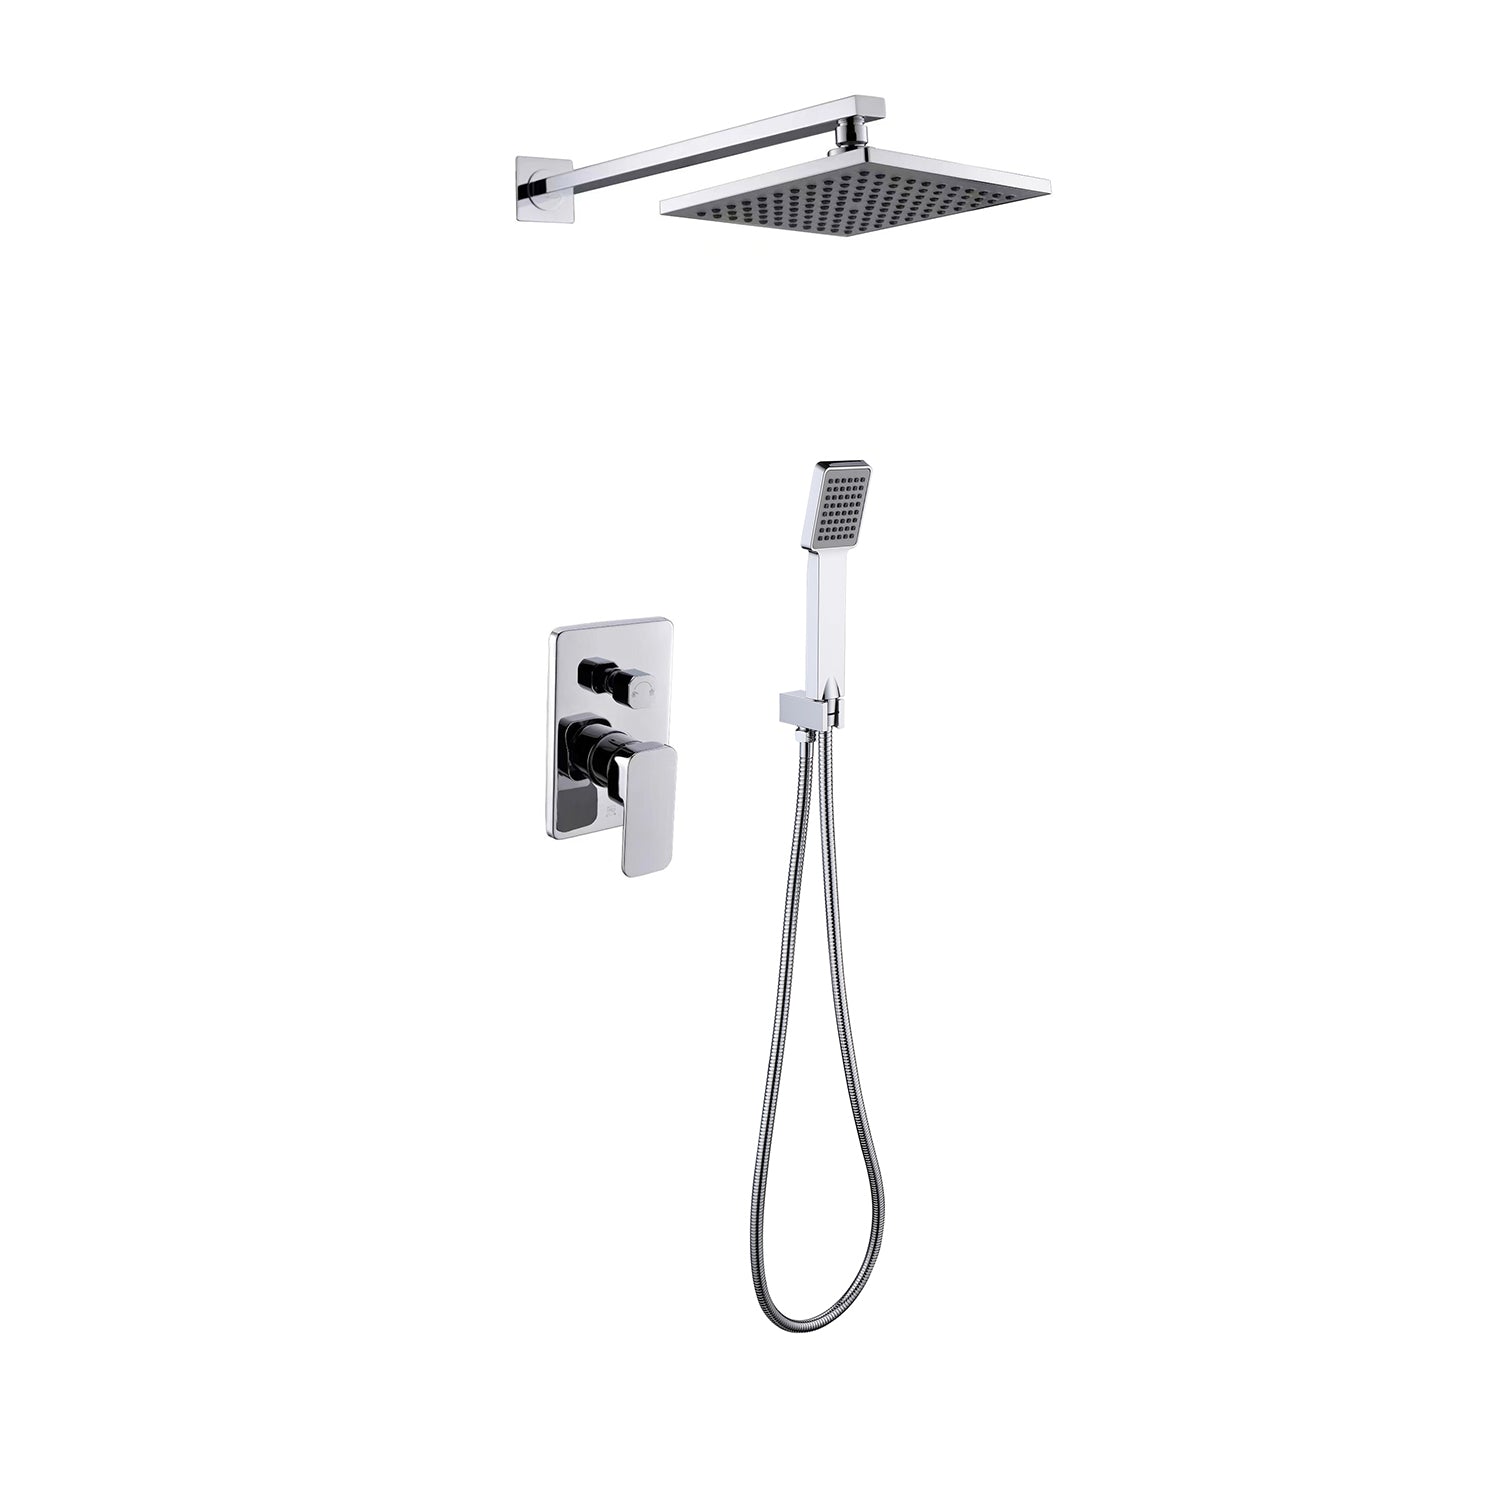 DAX Bathroom Rain Mixer Shower, Square Rainfall Shower Head System with Shower Trim and Hand Shower, Wall Mount, Brushed Nickel Finish (DAX-6813B-BN)